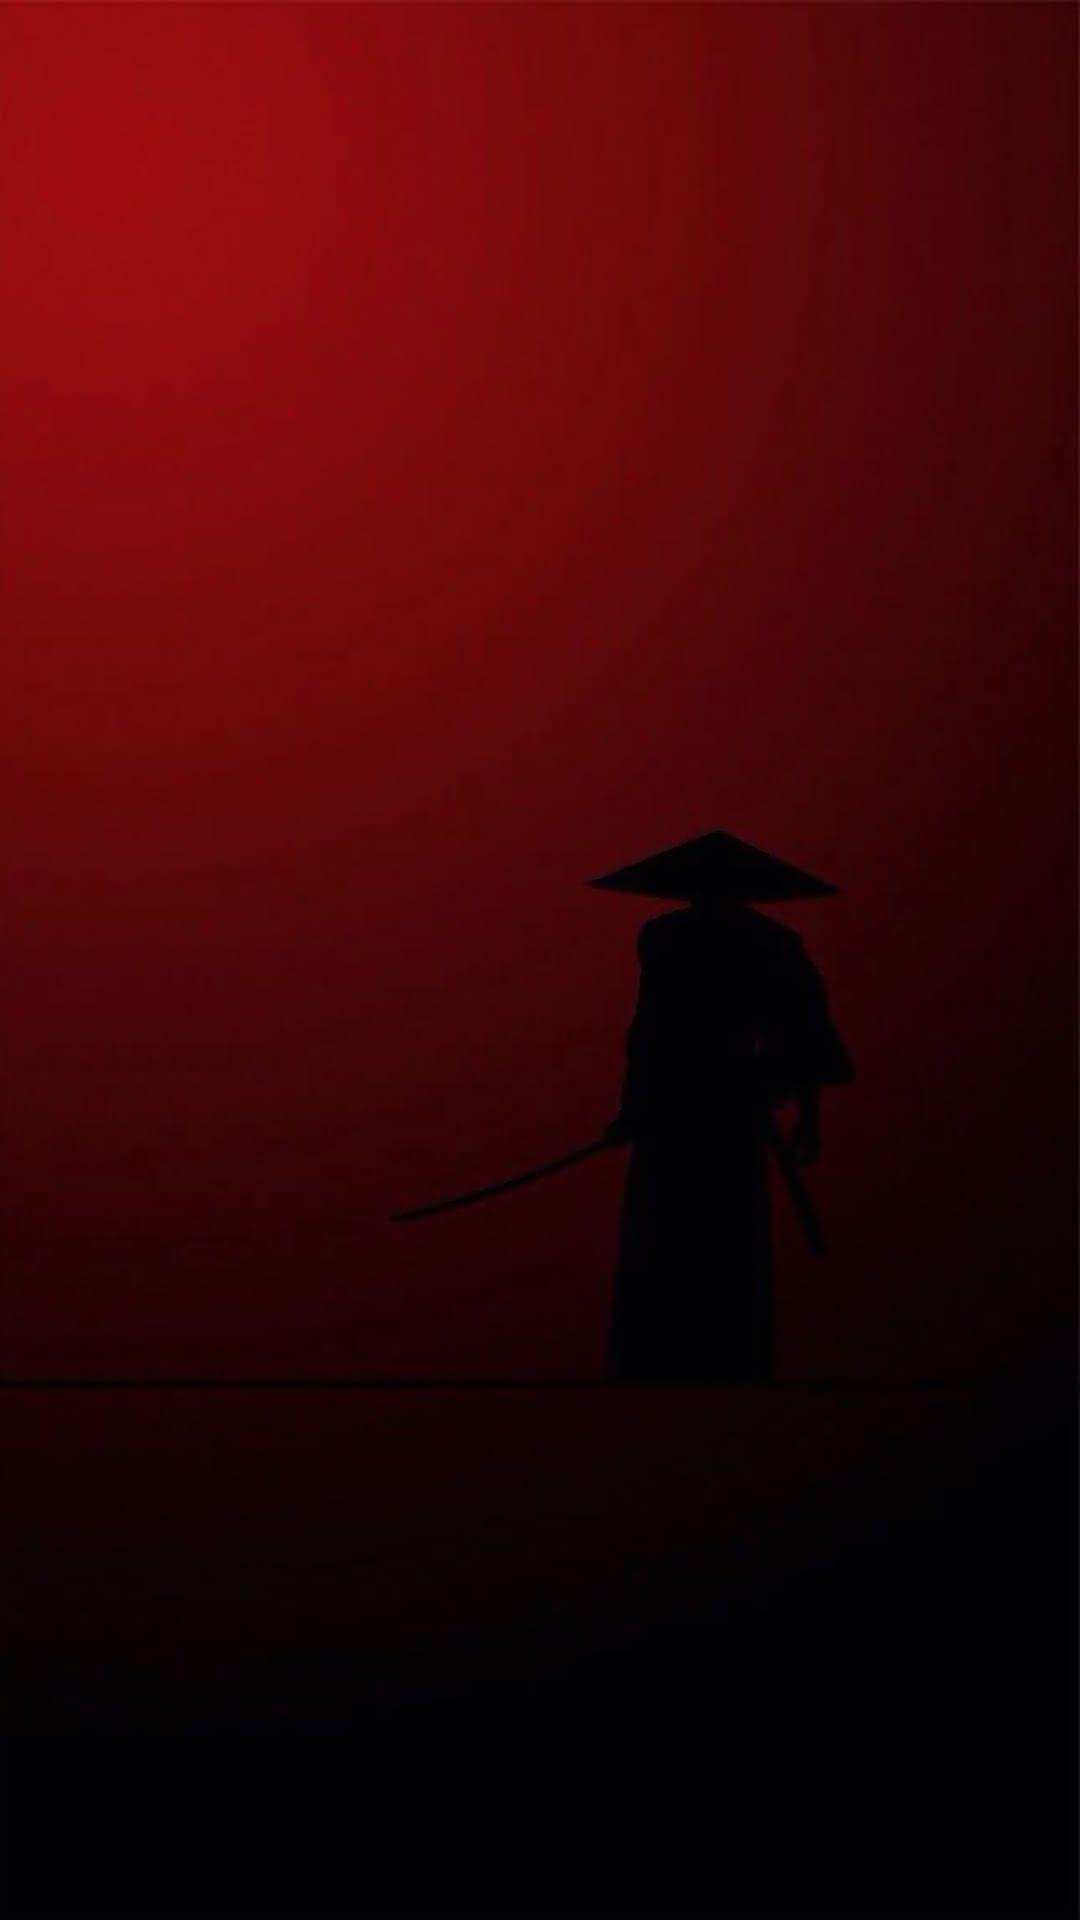 Wallpaper Cannibal ox Blade of The Ronin Blade of The Ronin Cannibal Ox  Hip Hop Music The Cold Vein Background  Download Free Image